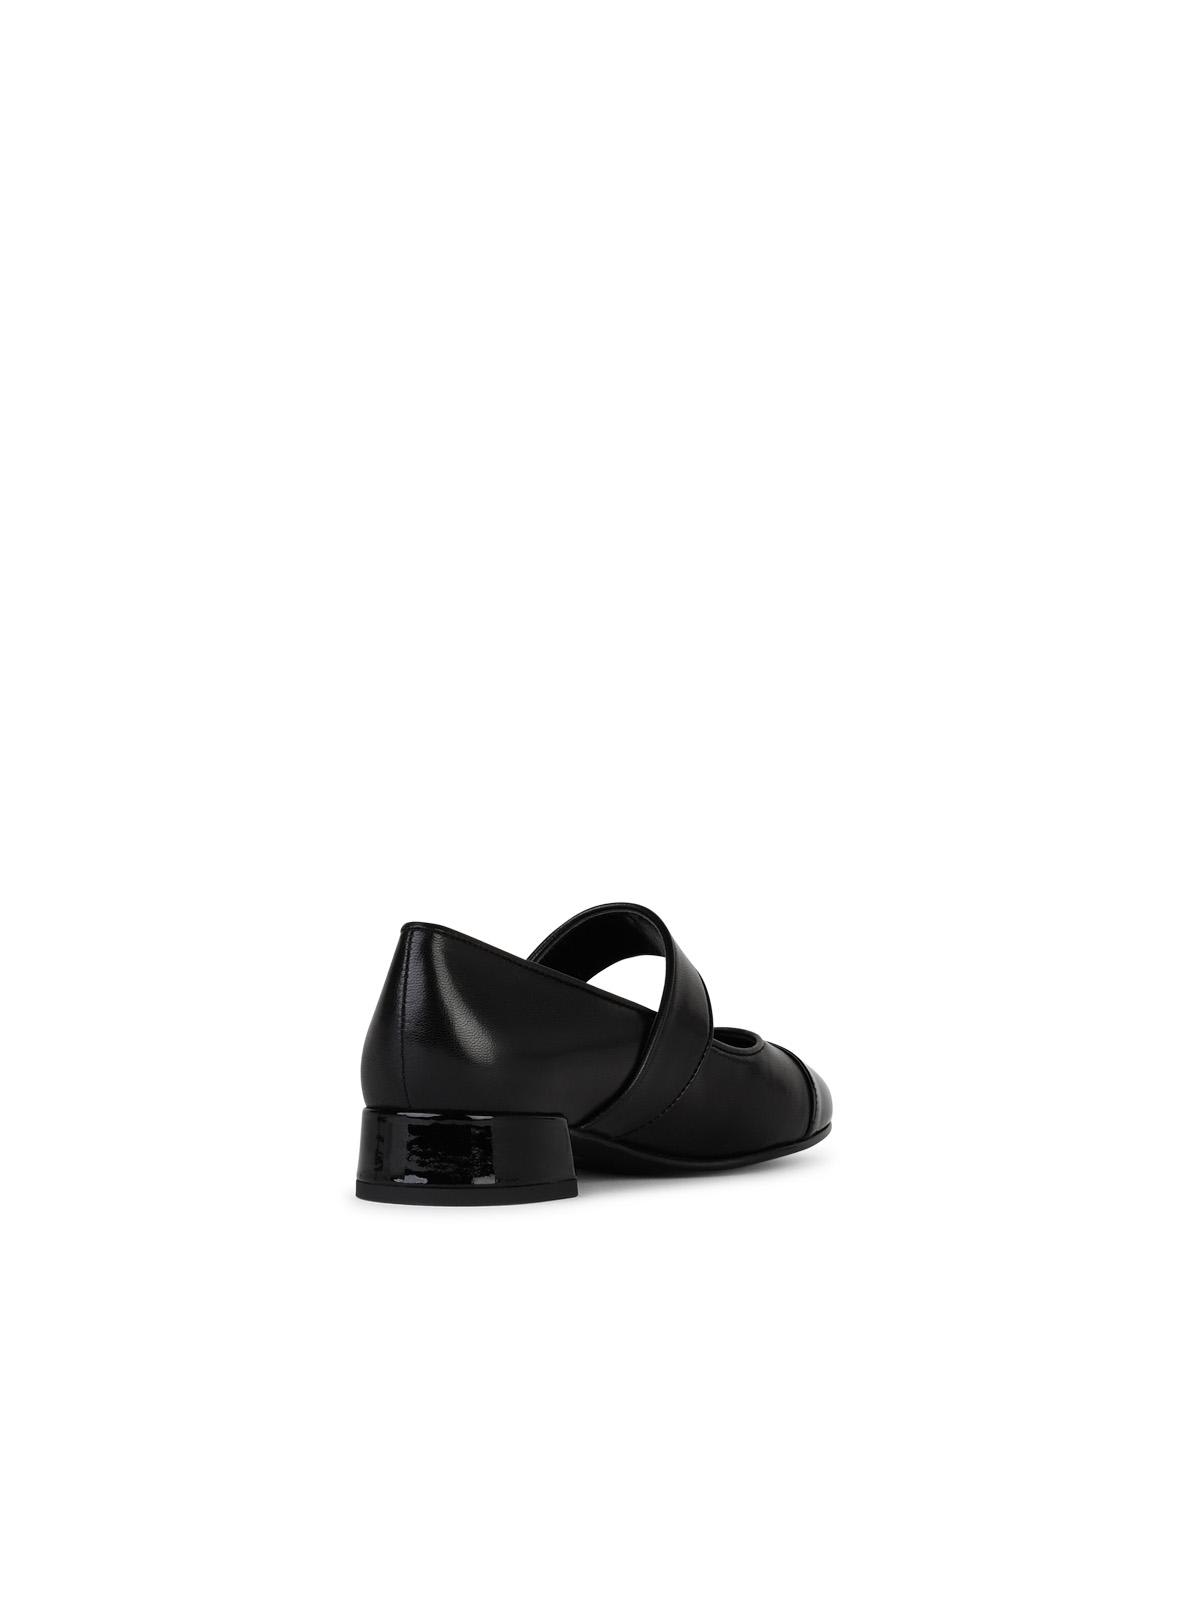 Shop Tory Burch Mary Jane Black Leather Ballet Flats